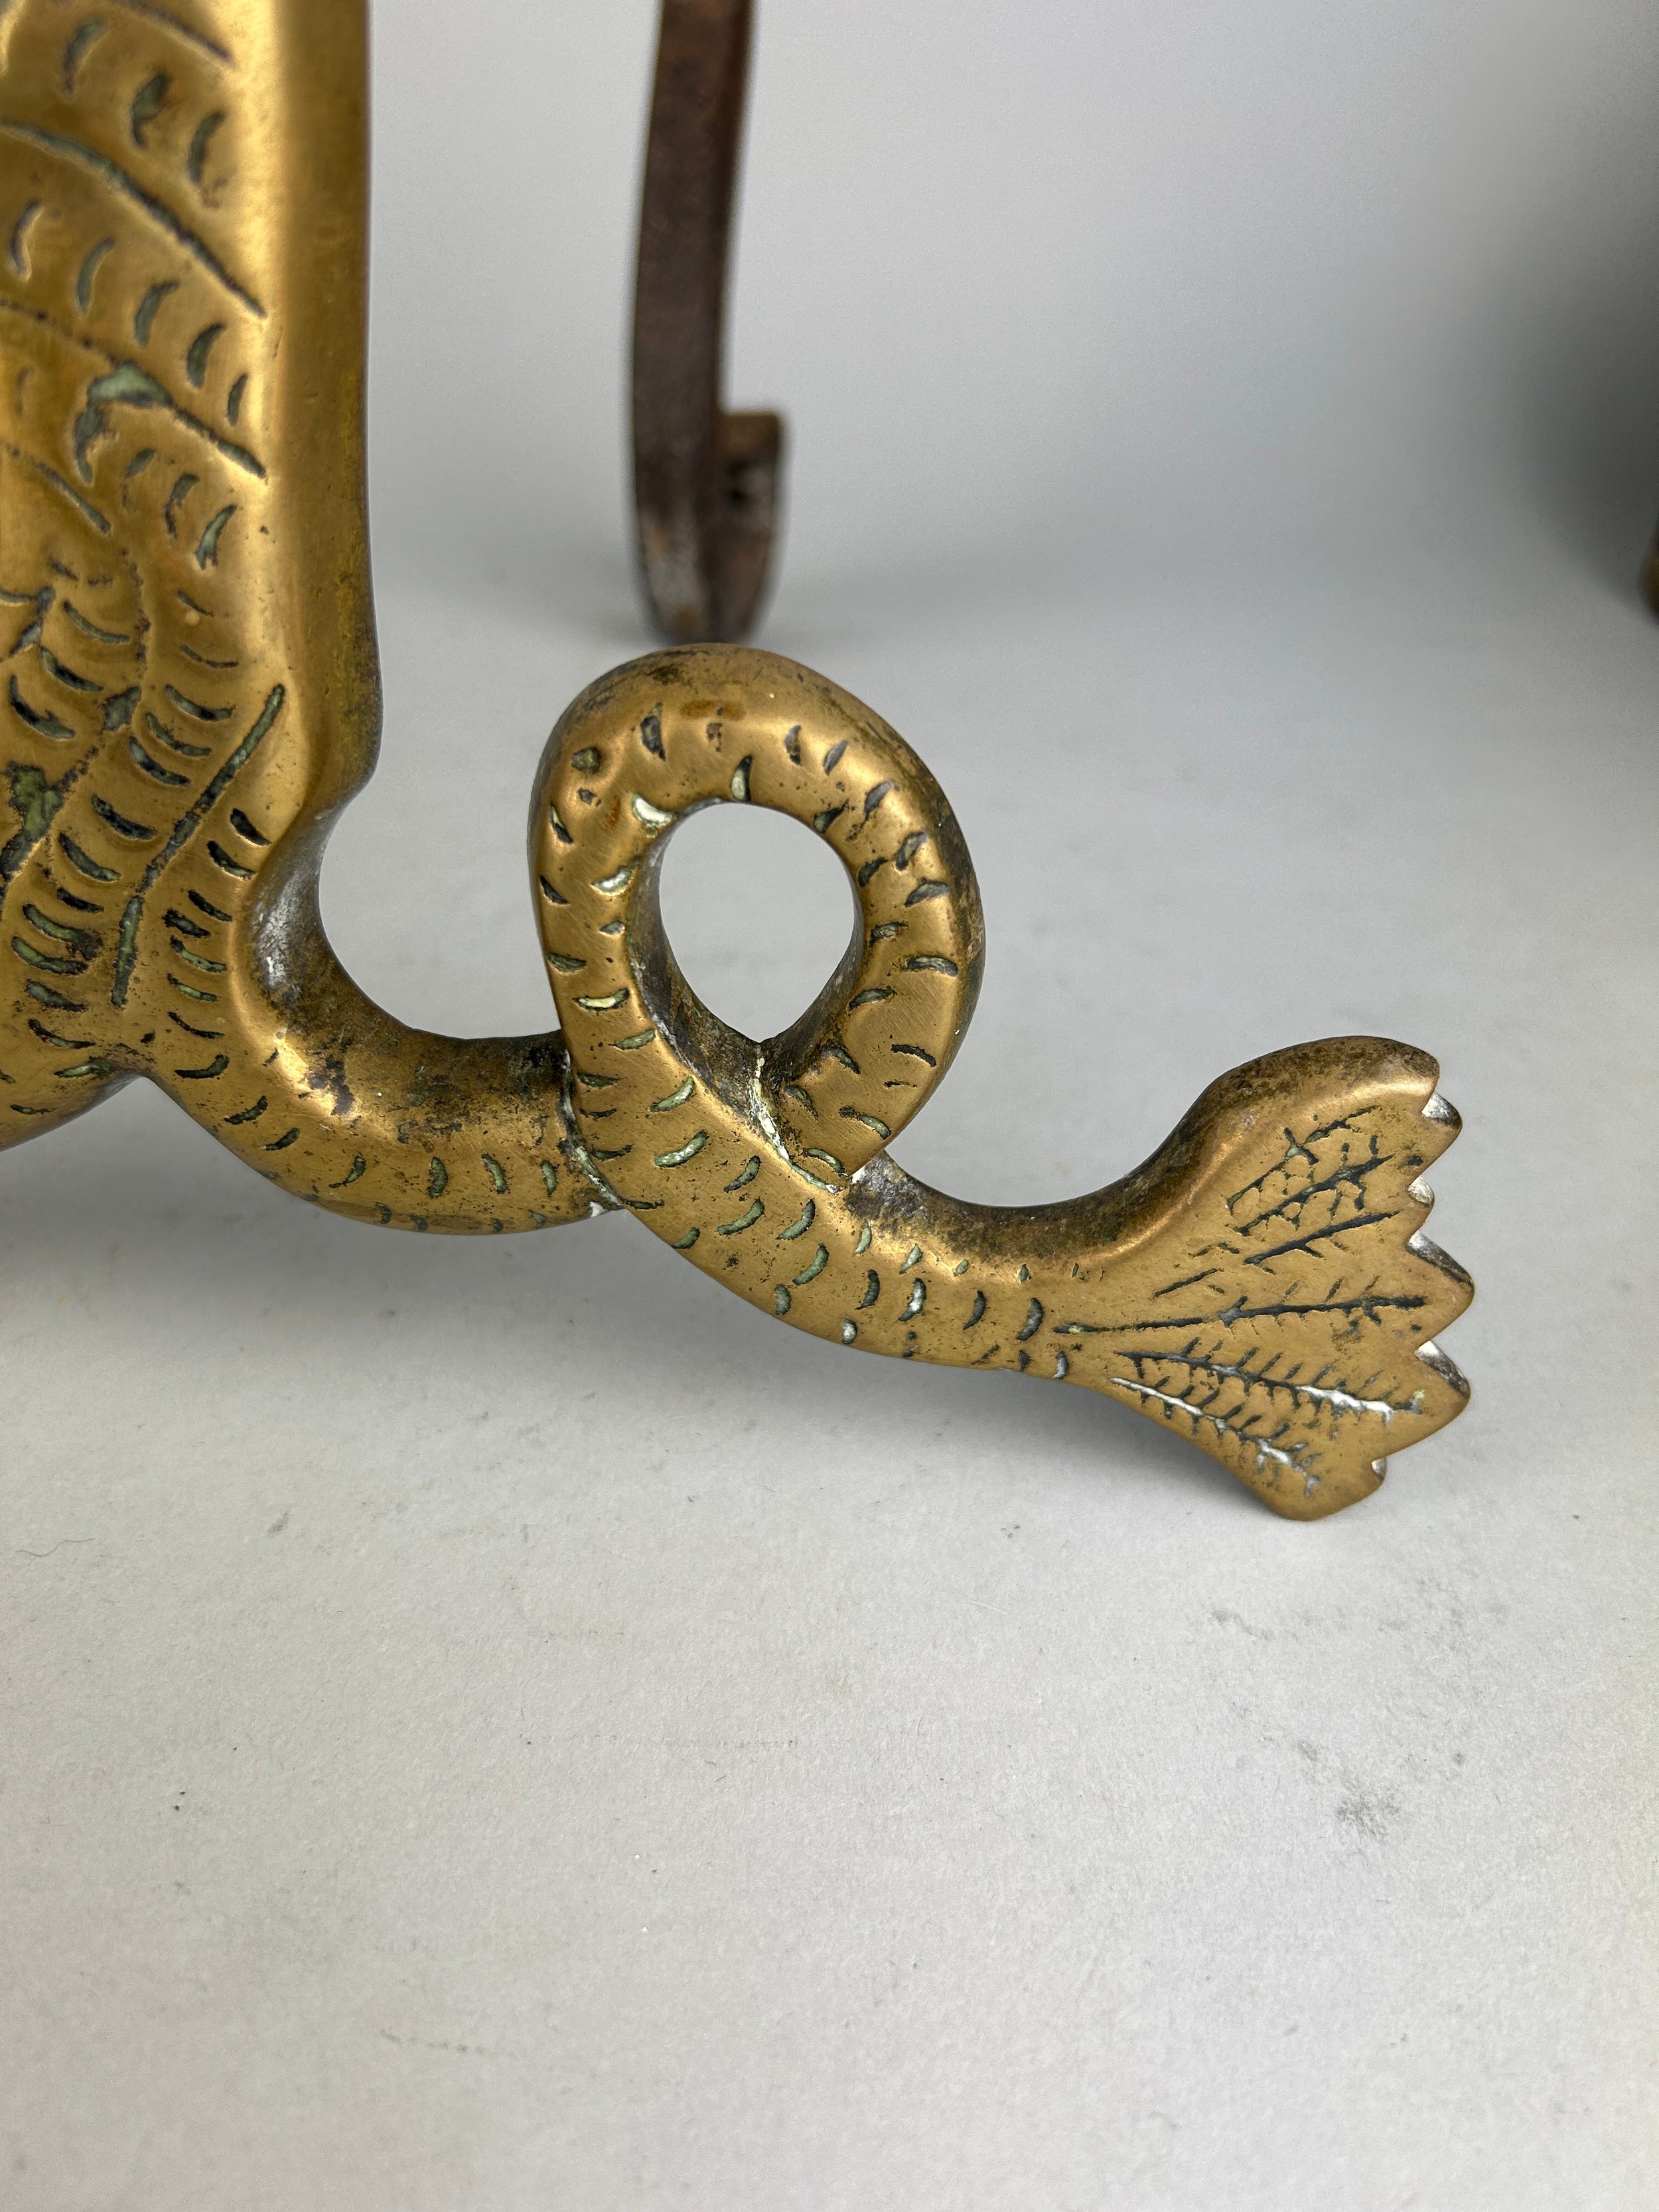 A PAIR OF 19TH CENTURY BRASS FIREDOGS DEPICTING A MALE FIGURE OF A SEA GOD - Image 5 of 7